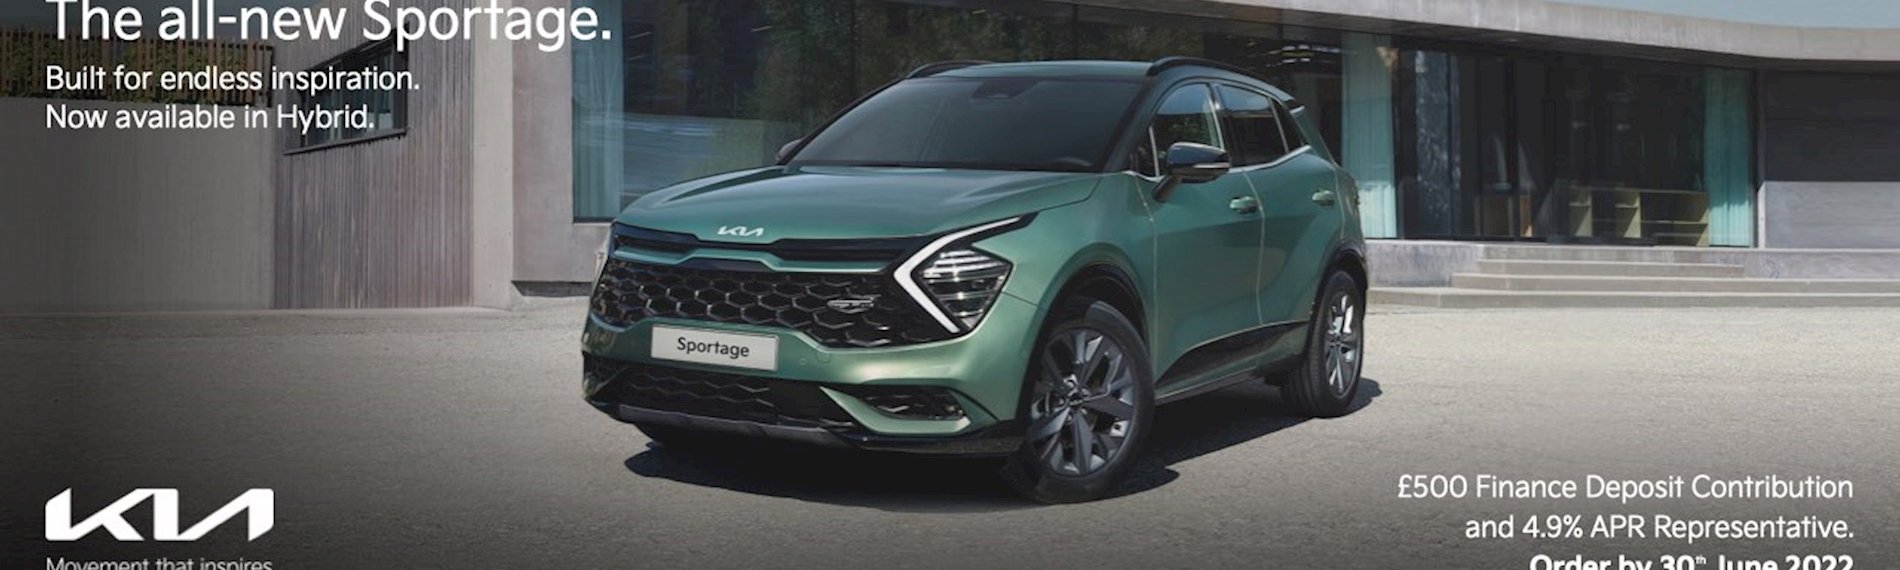 The all-new Sportage £500 Deposit Contribution